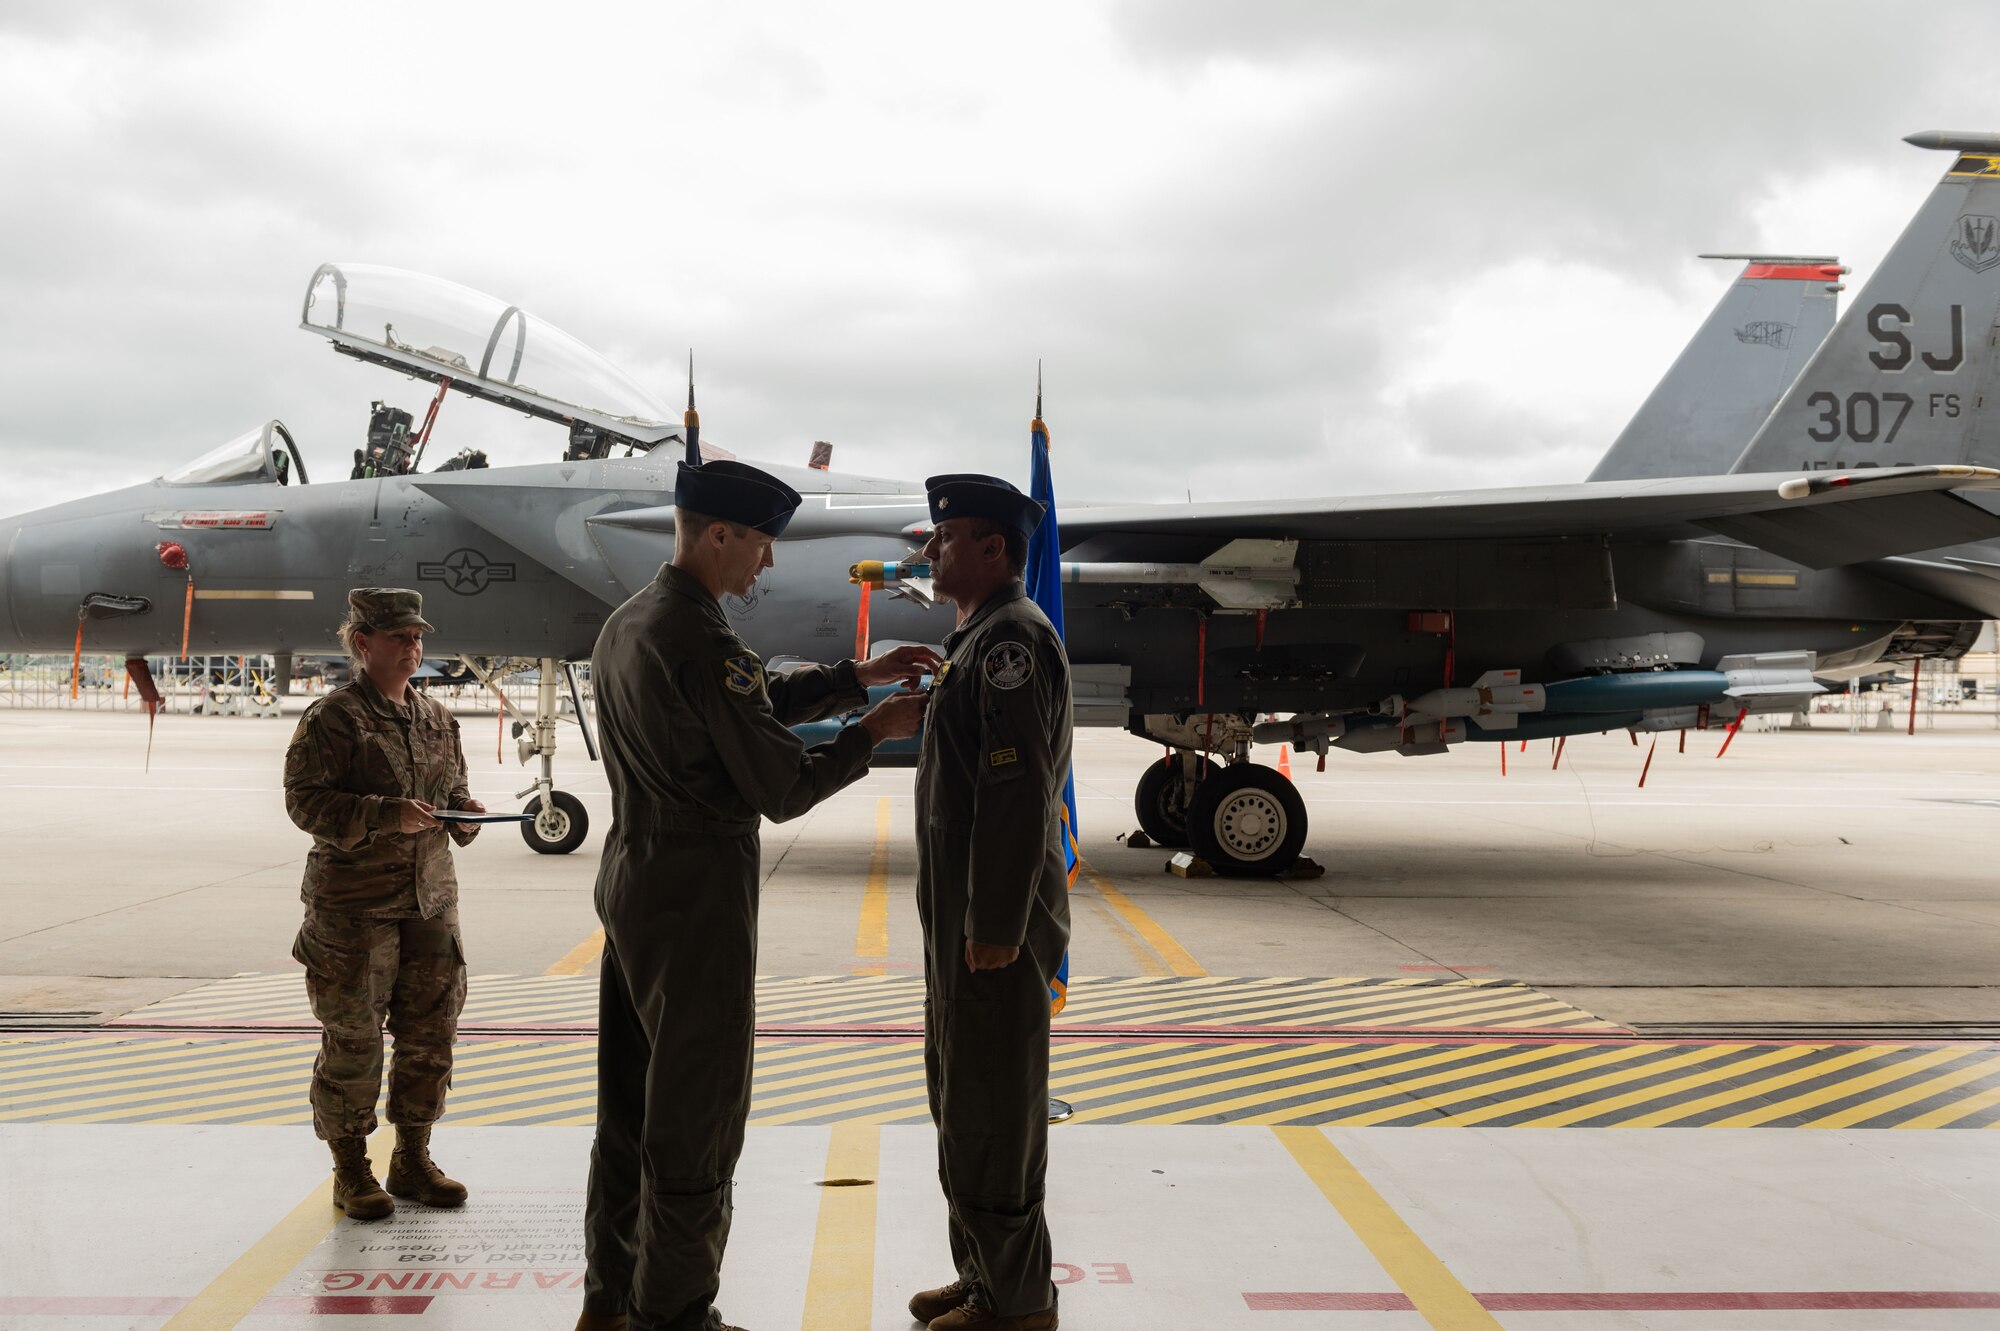 U.S. Air Force Col. Chad Shenk, 414th Fighter Squadron commander, pins the Meritorious Service Medal to Lt. Col. Sriram Krishnan, 307th Fighter Squadron commander, during a change of command ceremony at Seymour Johnson Air Force Base, North Carolina, June 2, 2023. The Meritorious Service Medal is a military award presented to members of the United States Armed Forces who distinguished themselves by outstanding service. (U.S. Air Force photo by Airman 1st Class Rebecca Sirimarco-Lang)